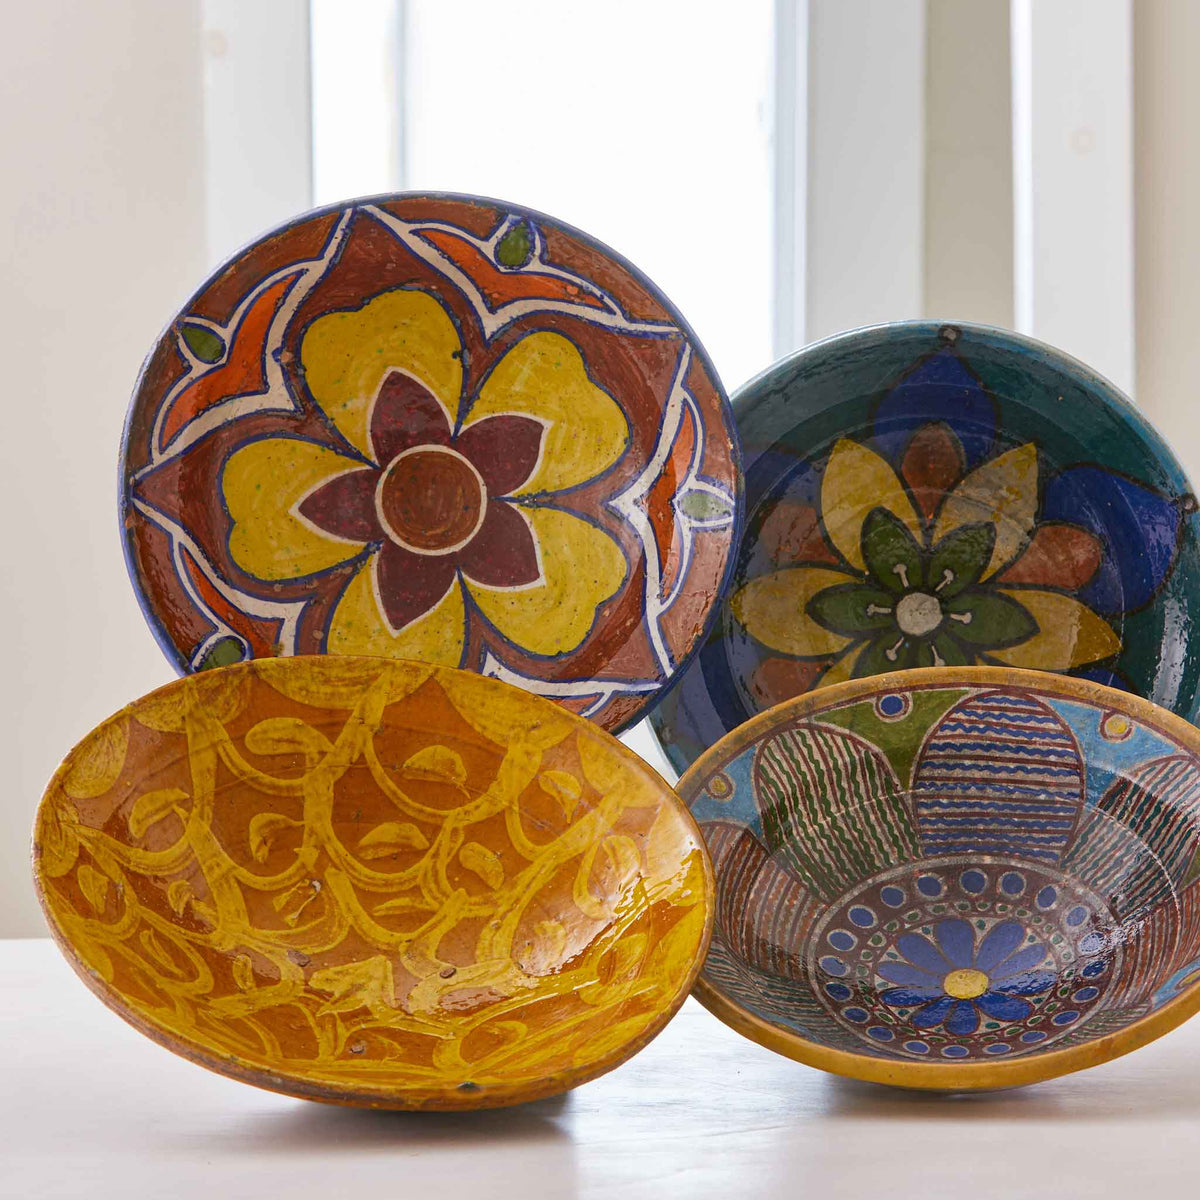 DECORATIVE PAINTED CLAY BOWLS